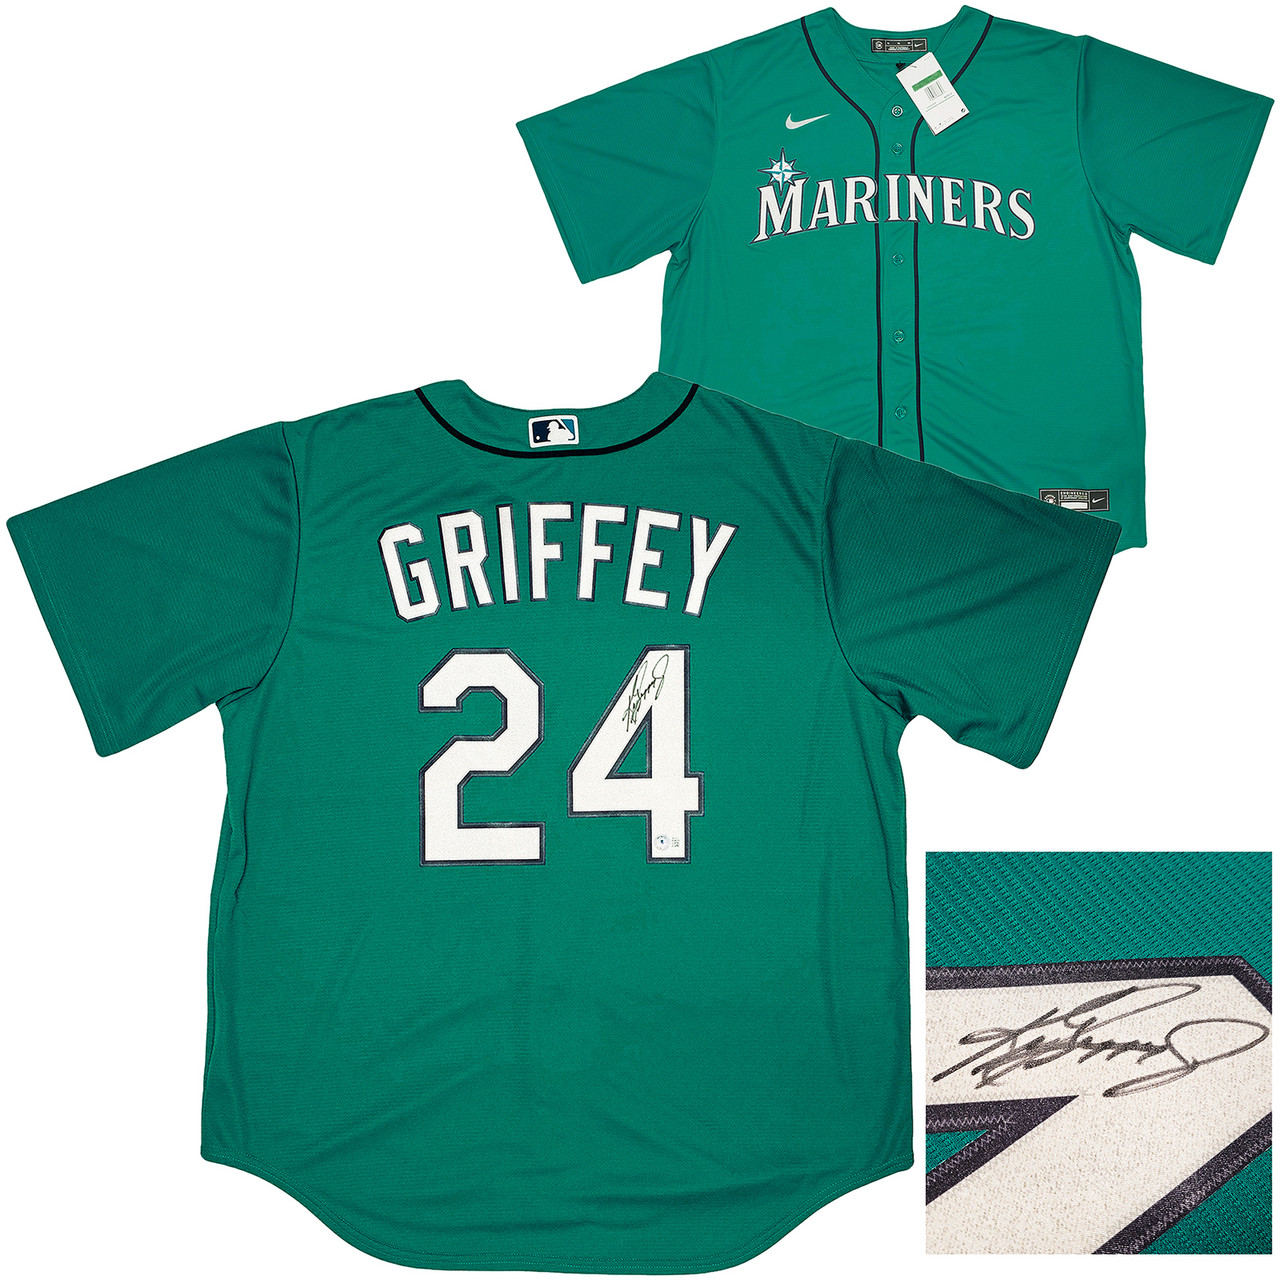 Ken Griffey Jr Autographed and Framed Seattle Mariners Jersey